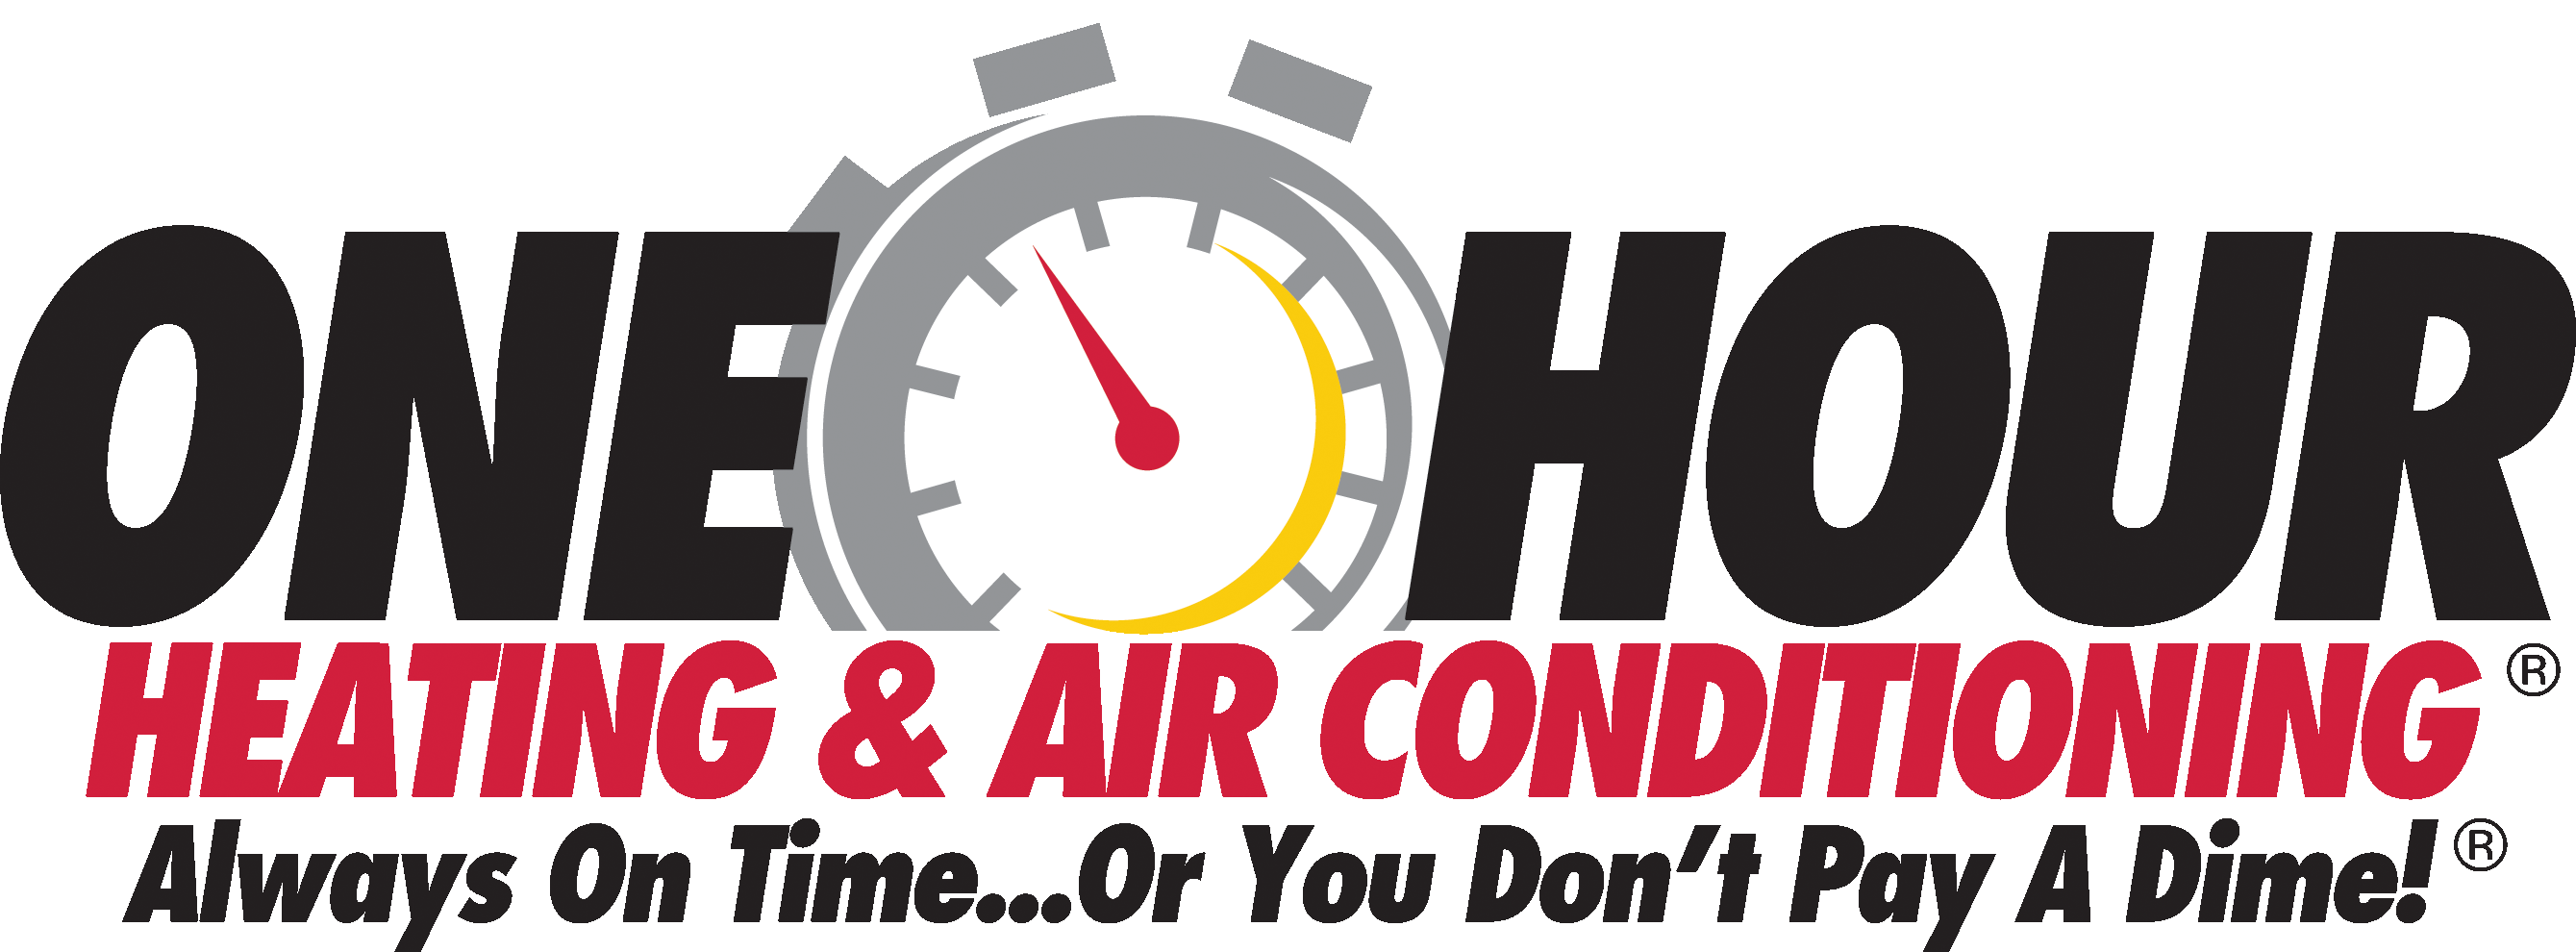 One Hour Air Conditioning & Heating - Las Vegas Logo